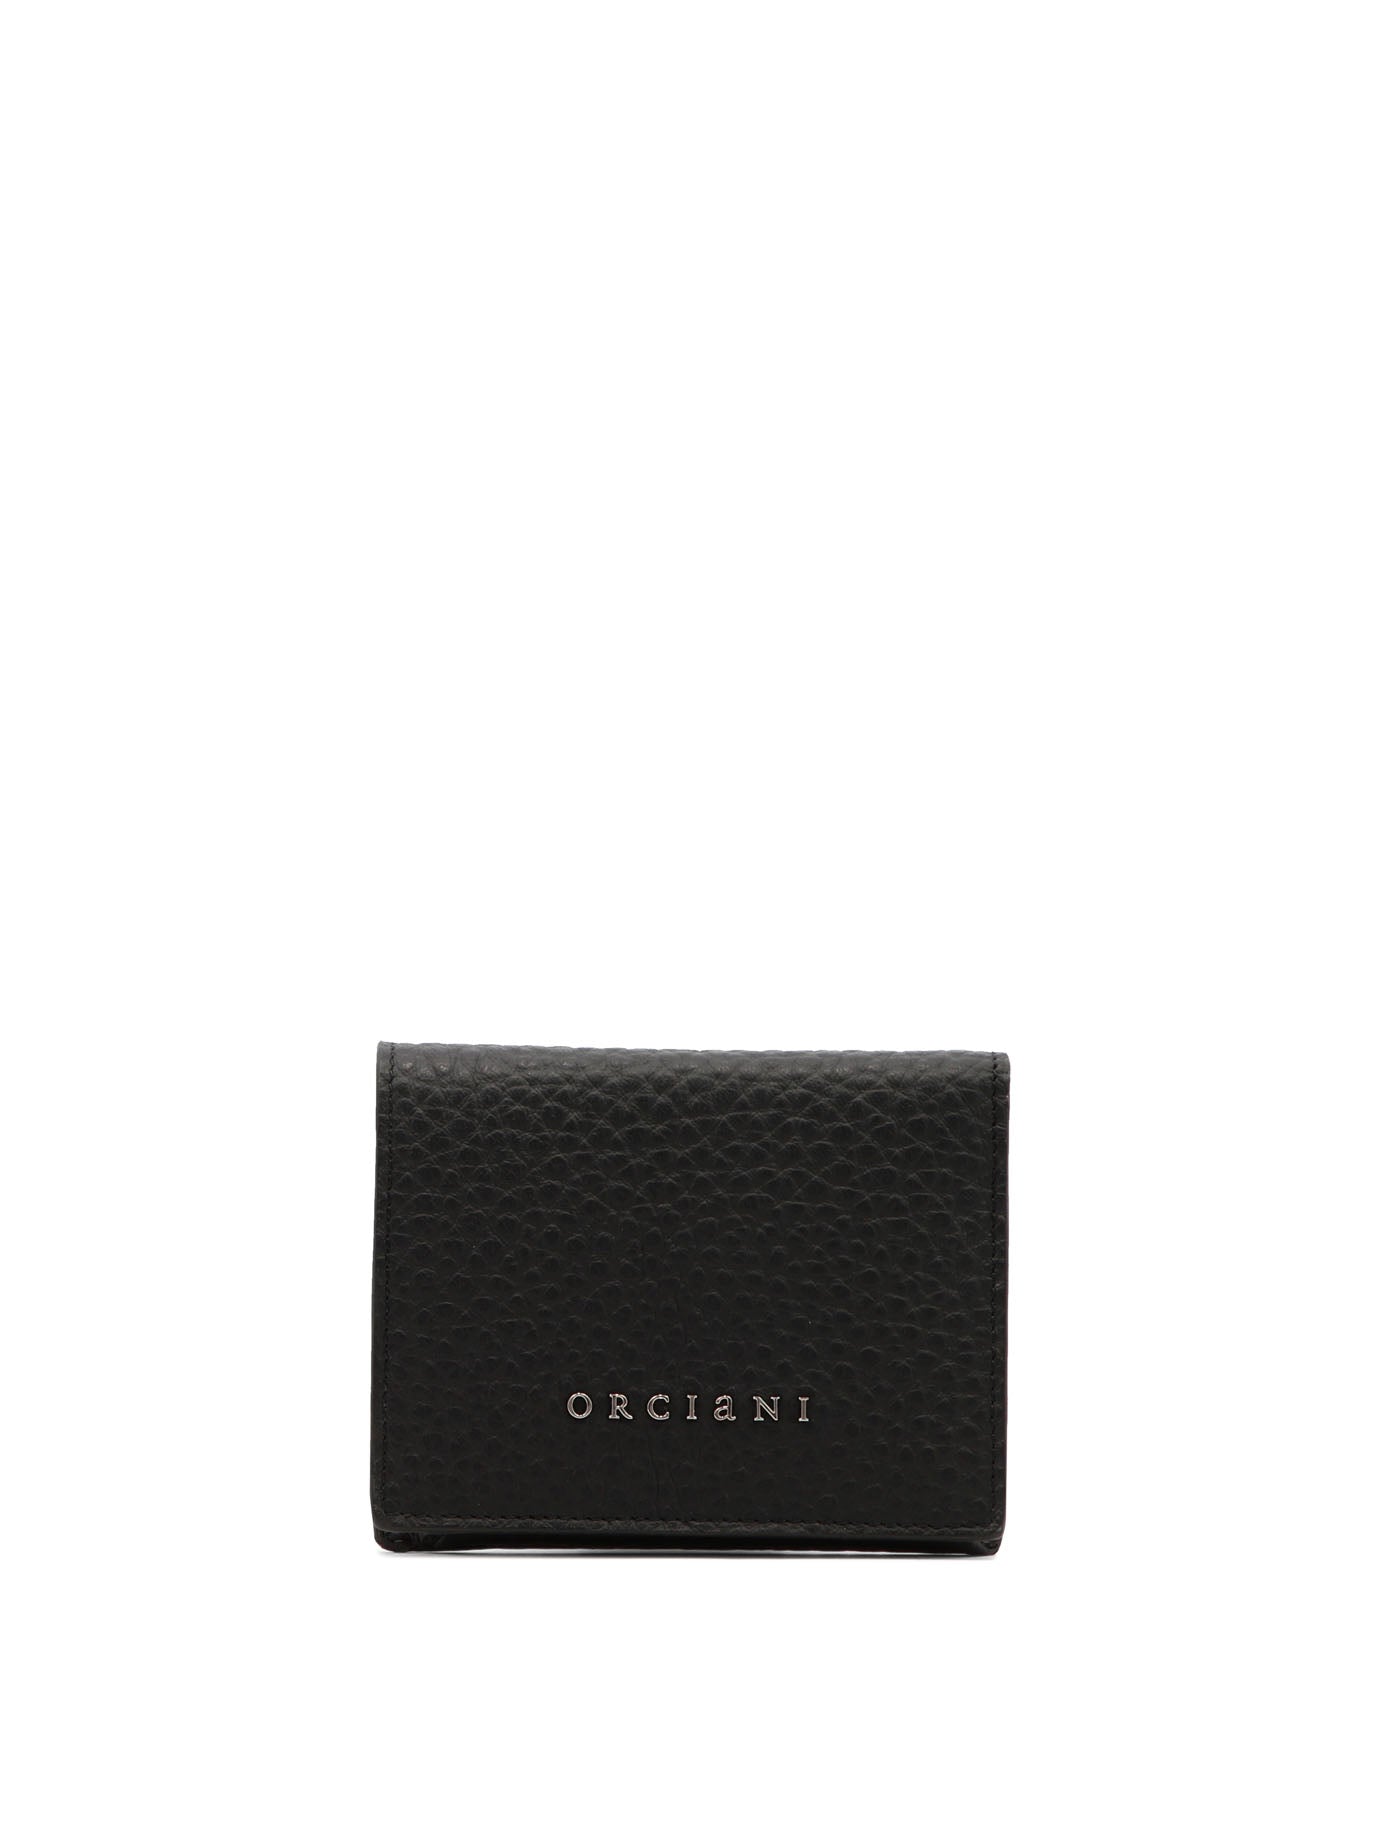 ORCIANI ORCIANI SOFT WALLET